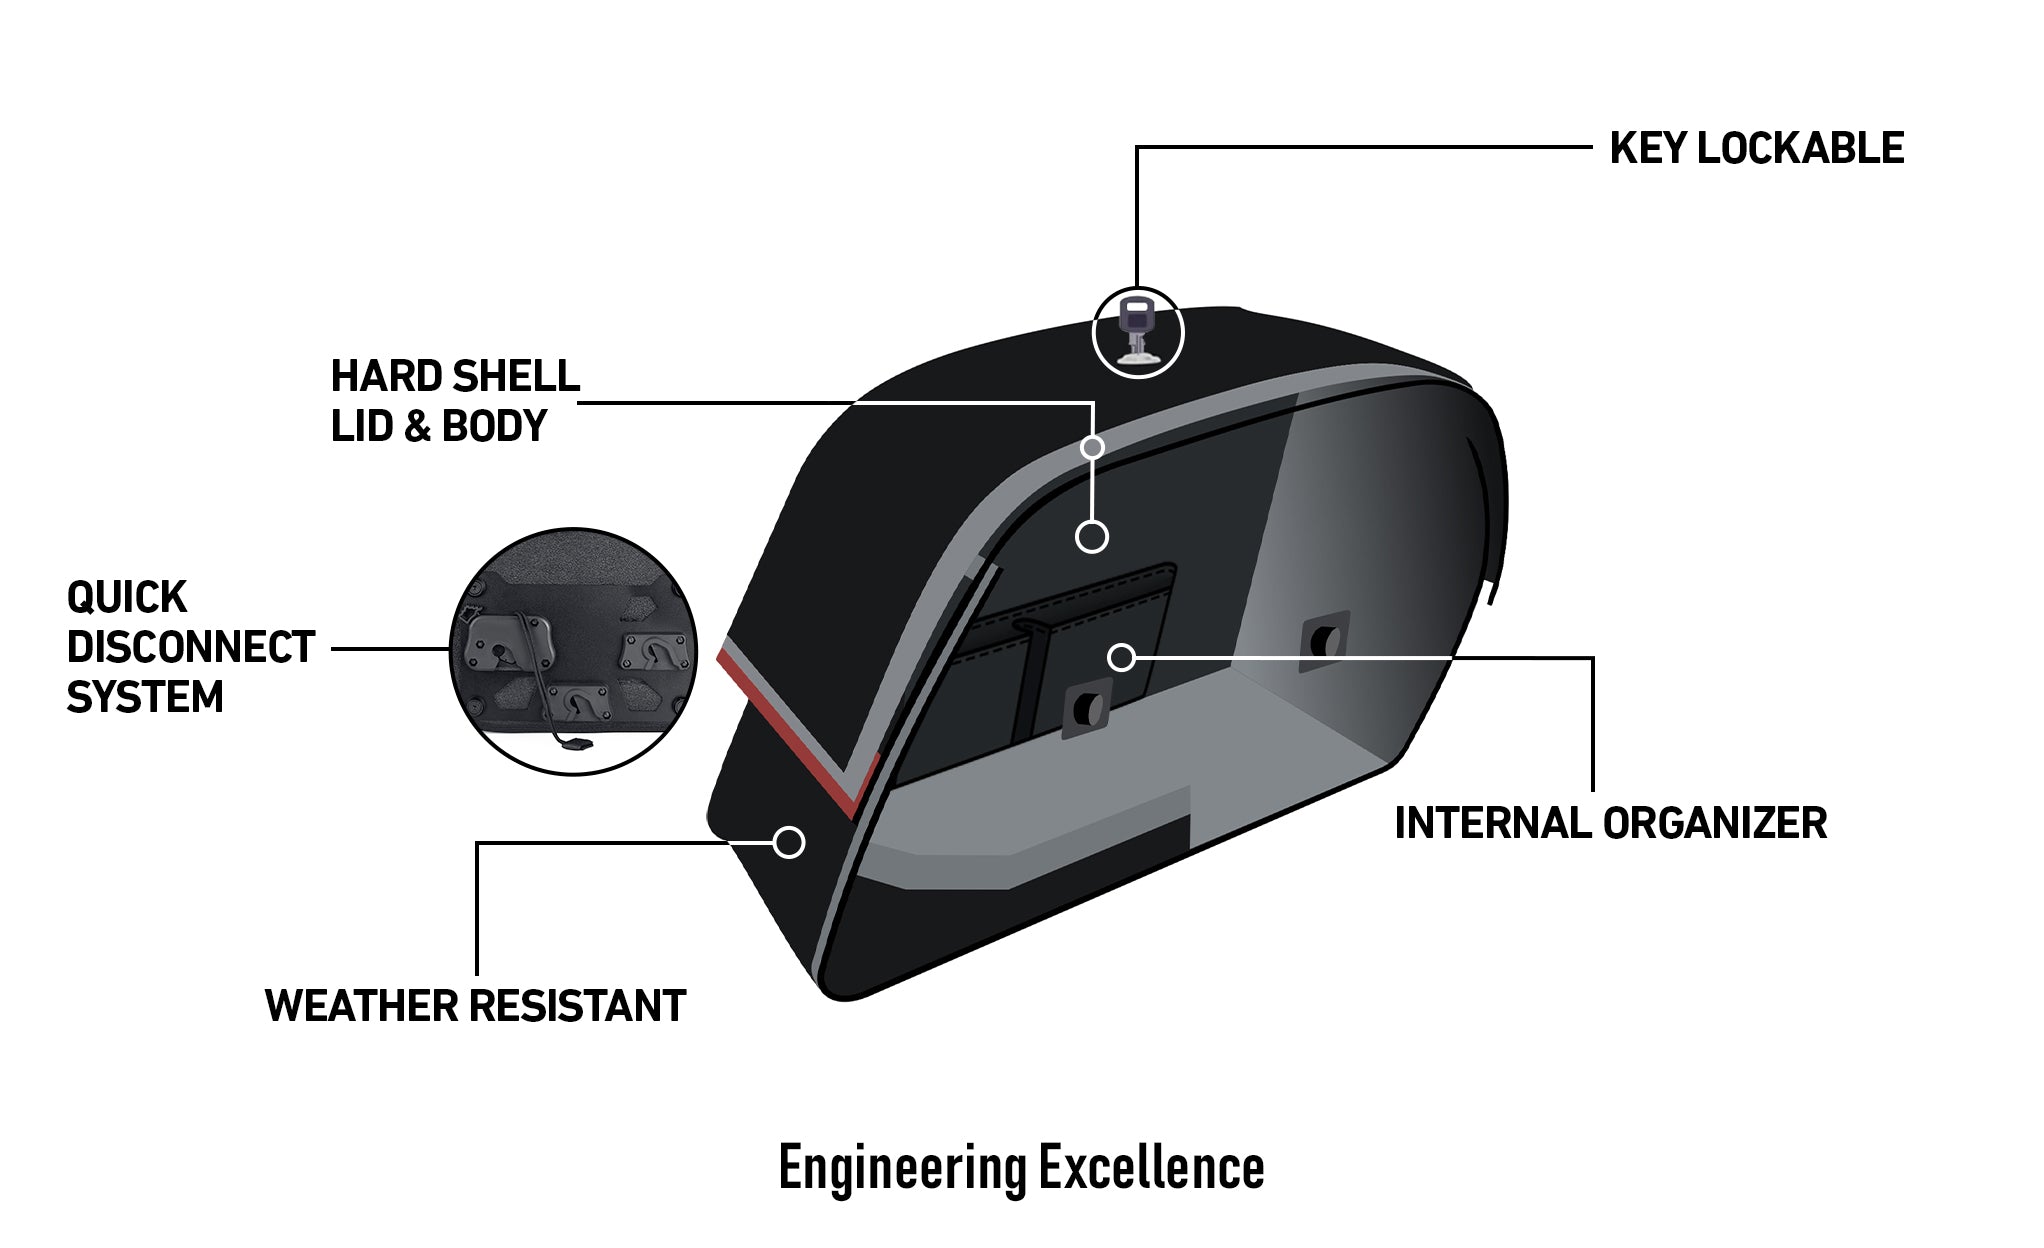 22L - Warrior Medium Quick-Mount Ducati Scrambler (2018+) Motorcycle Saddlebags Engineering Excellence @expand